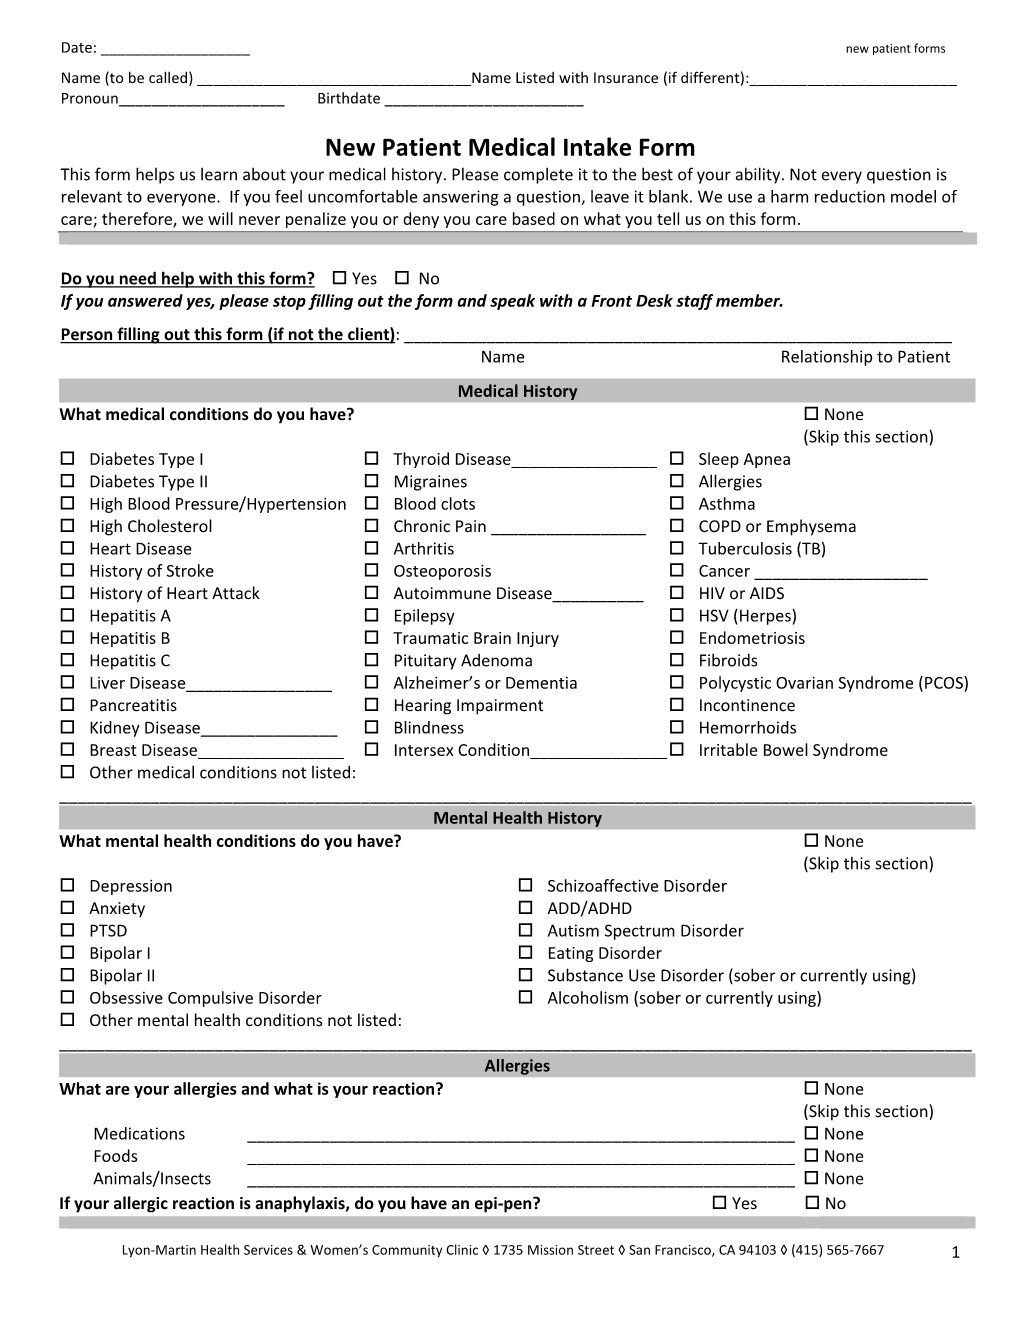 New Patient Medical Intake Form This Form Helps Us Learn About Your Medical History